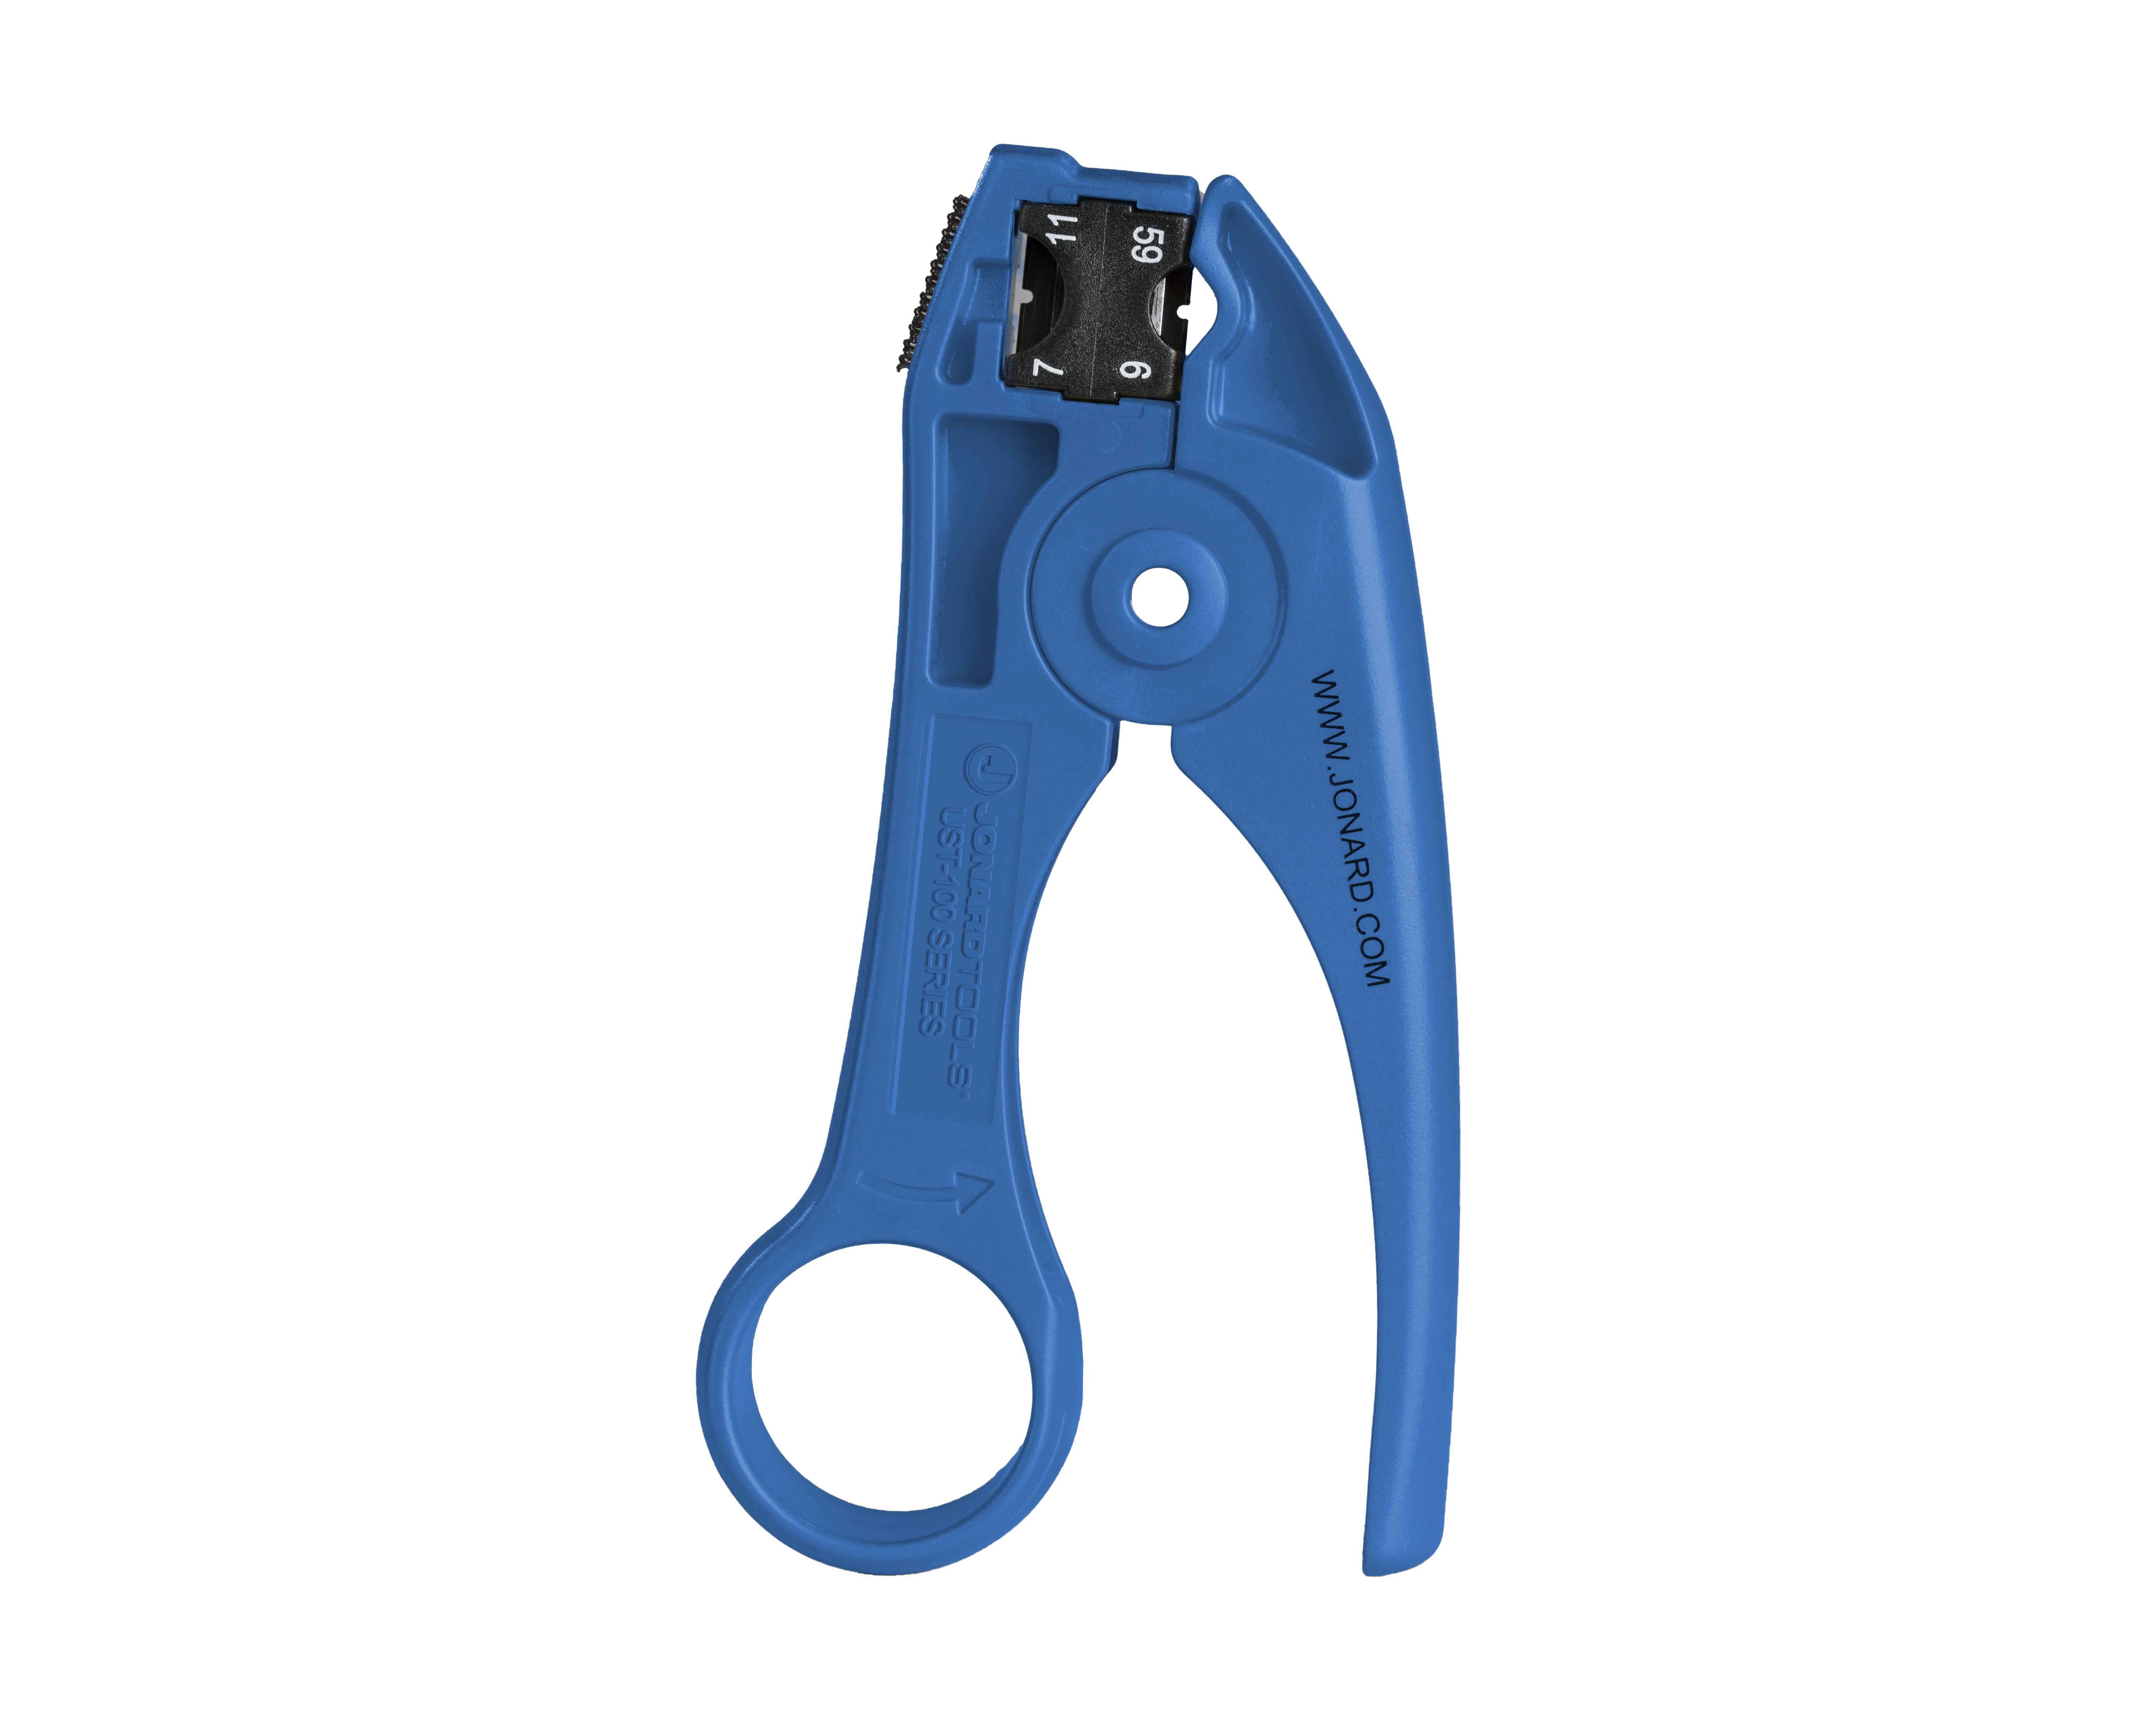 Jonard Tools Coax Cable Stripper Rg59/6 and 7/11 Ust-125 for sale online 